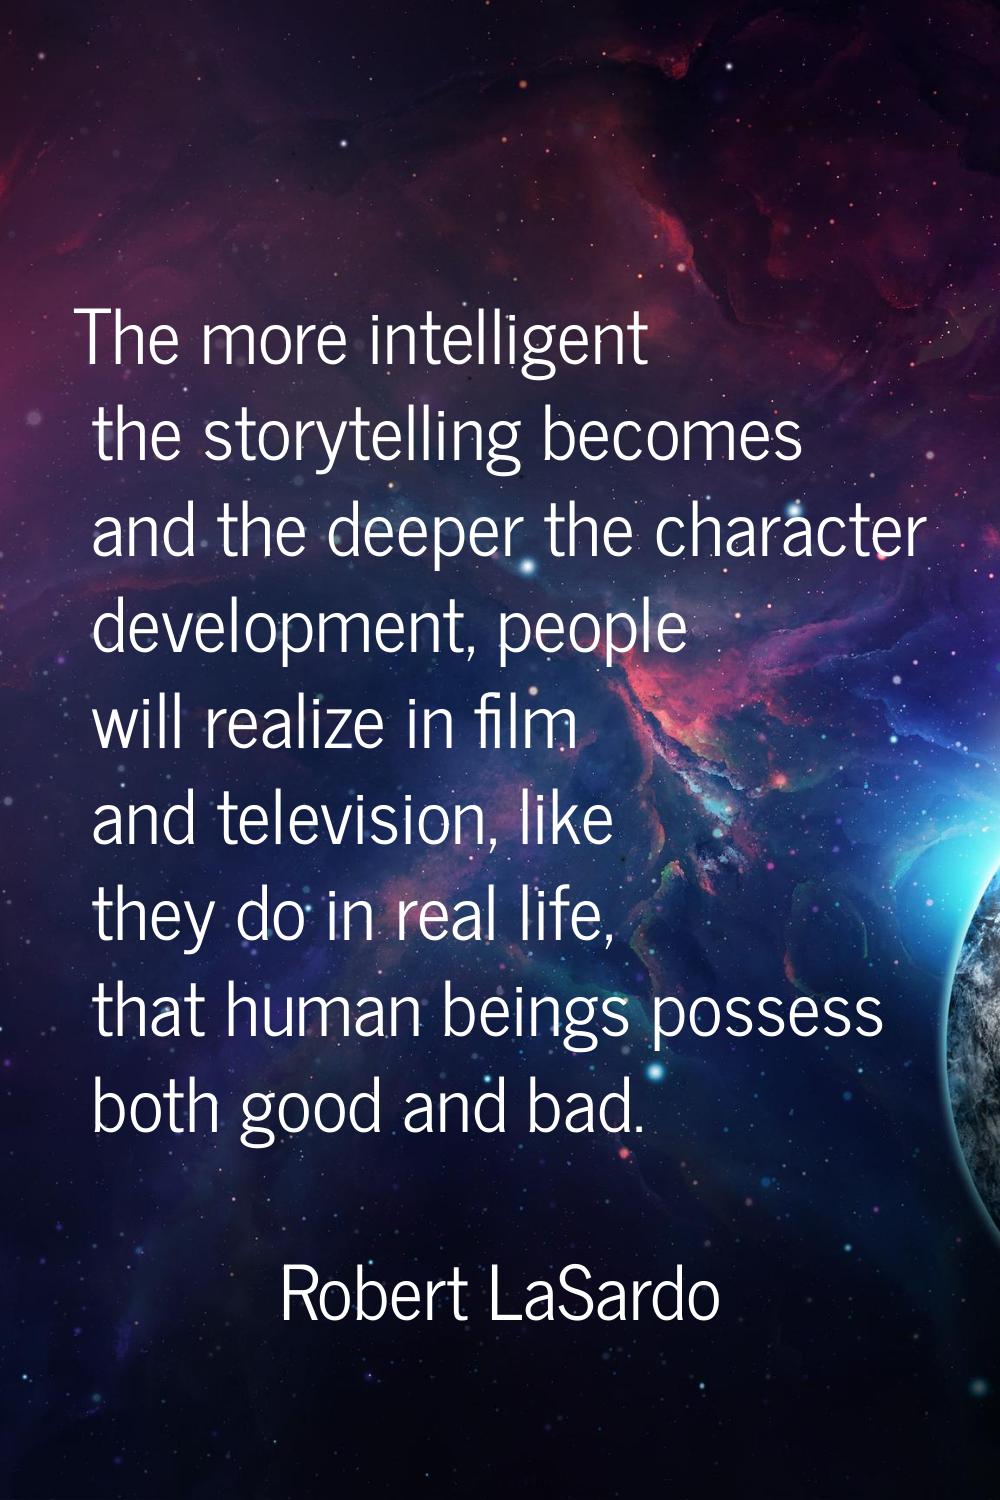 The more intelligent the storytelling becomes and the deeper the character development, people will